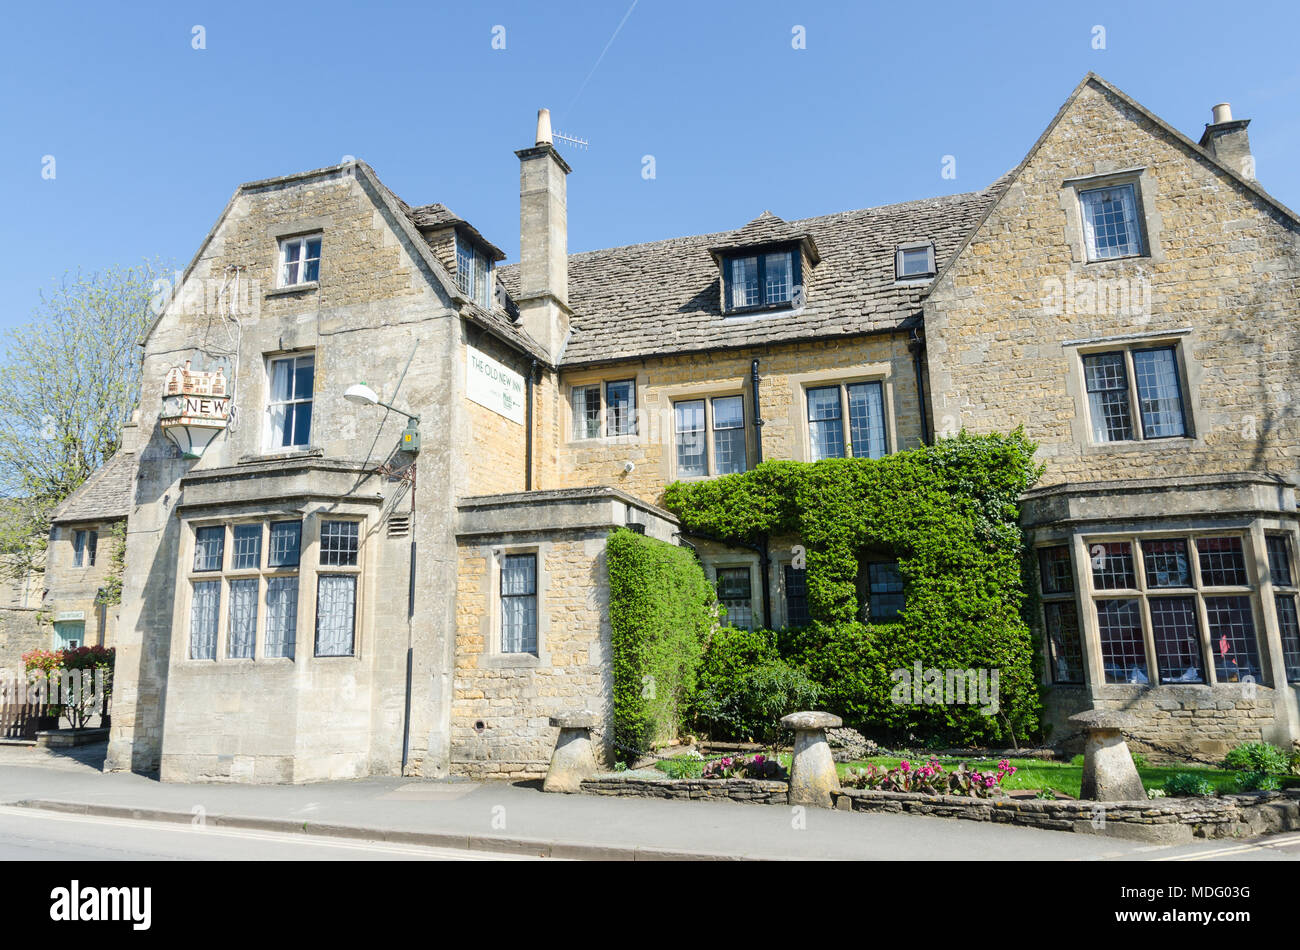 The Old New Inn in the popular Cotswold village of Bourton-on-the-Water, Gloucestershire in spring sunshine Stock Photo